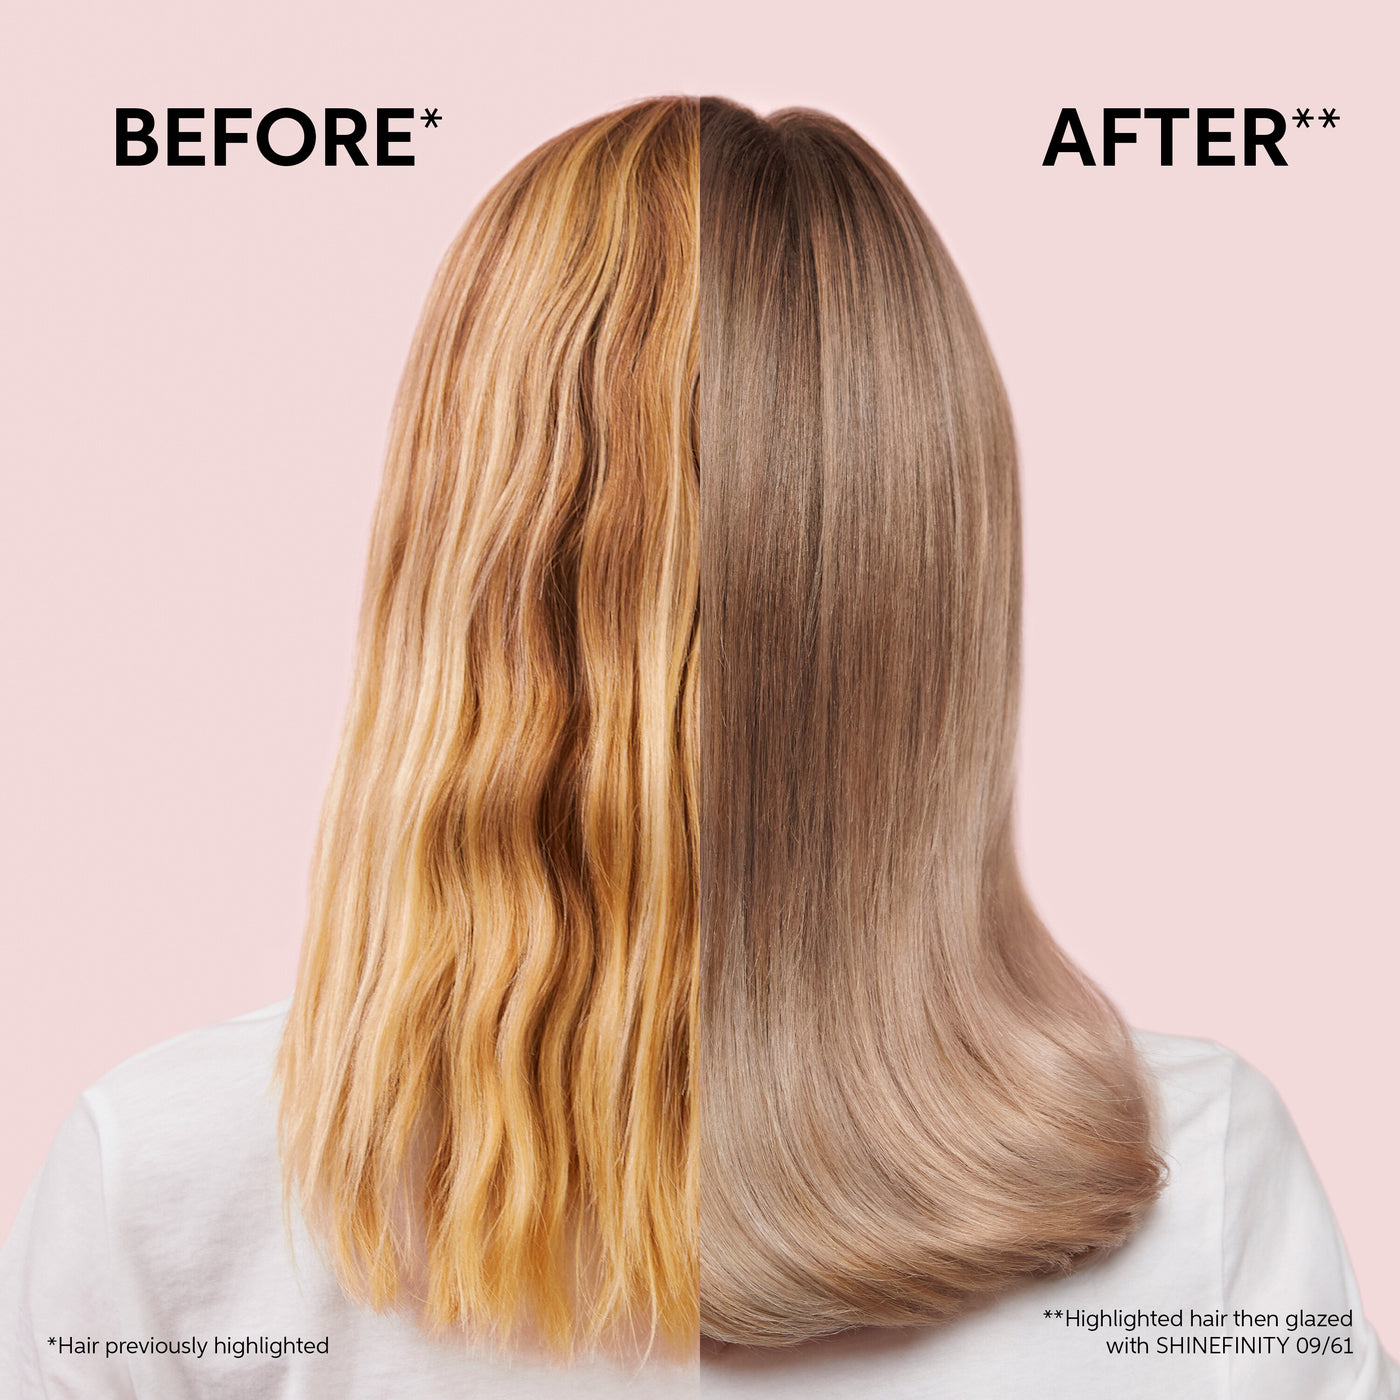 Wella Professionals Shinefinity Zero Lift Glaze Demi-Permanent Hair Colour (60ml) before and after